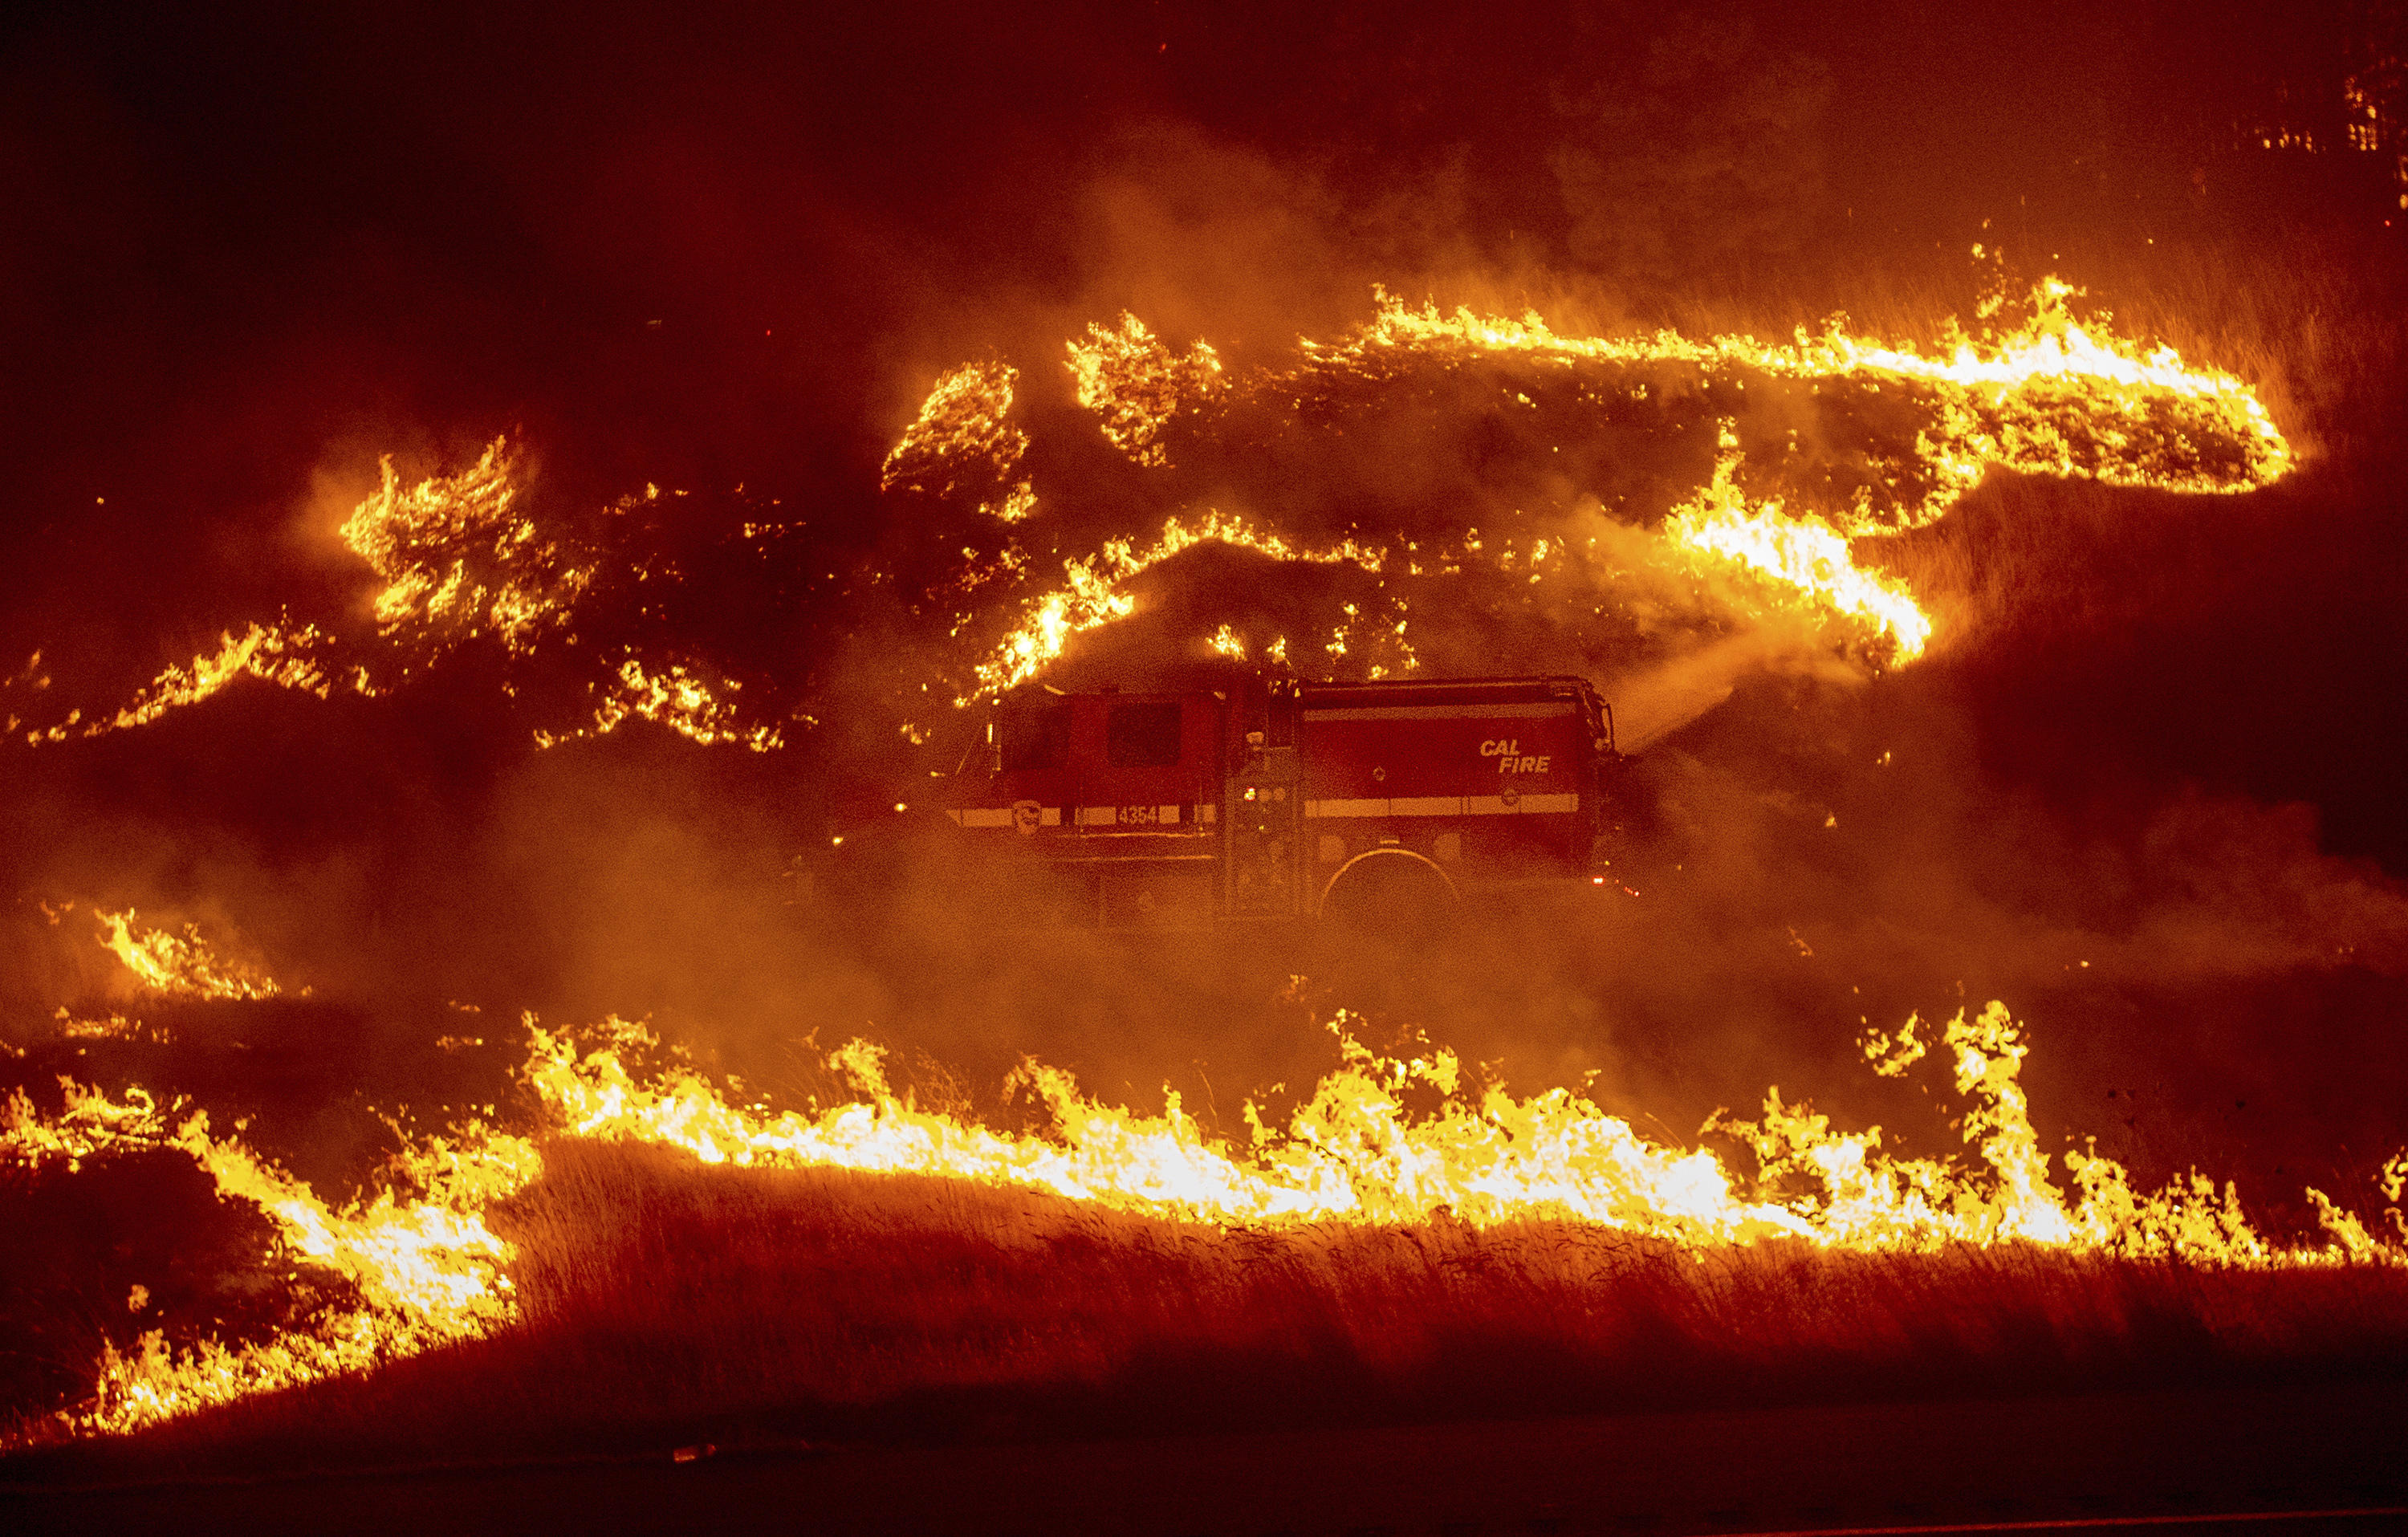 Delta Fire: Dramatic tales after roaring wildfire closes major Calif.  freeway - CBS News